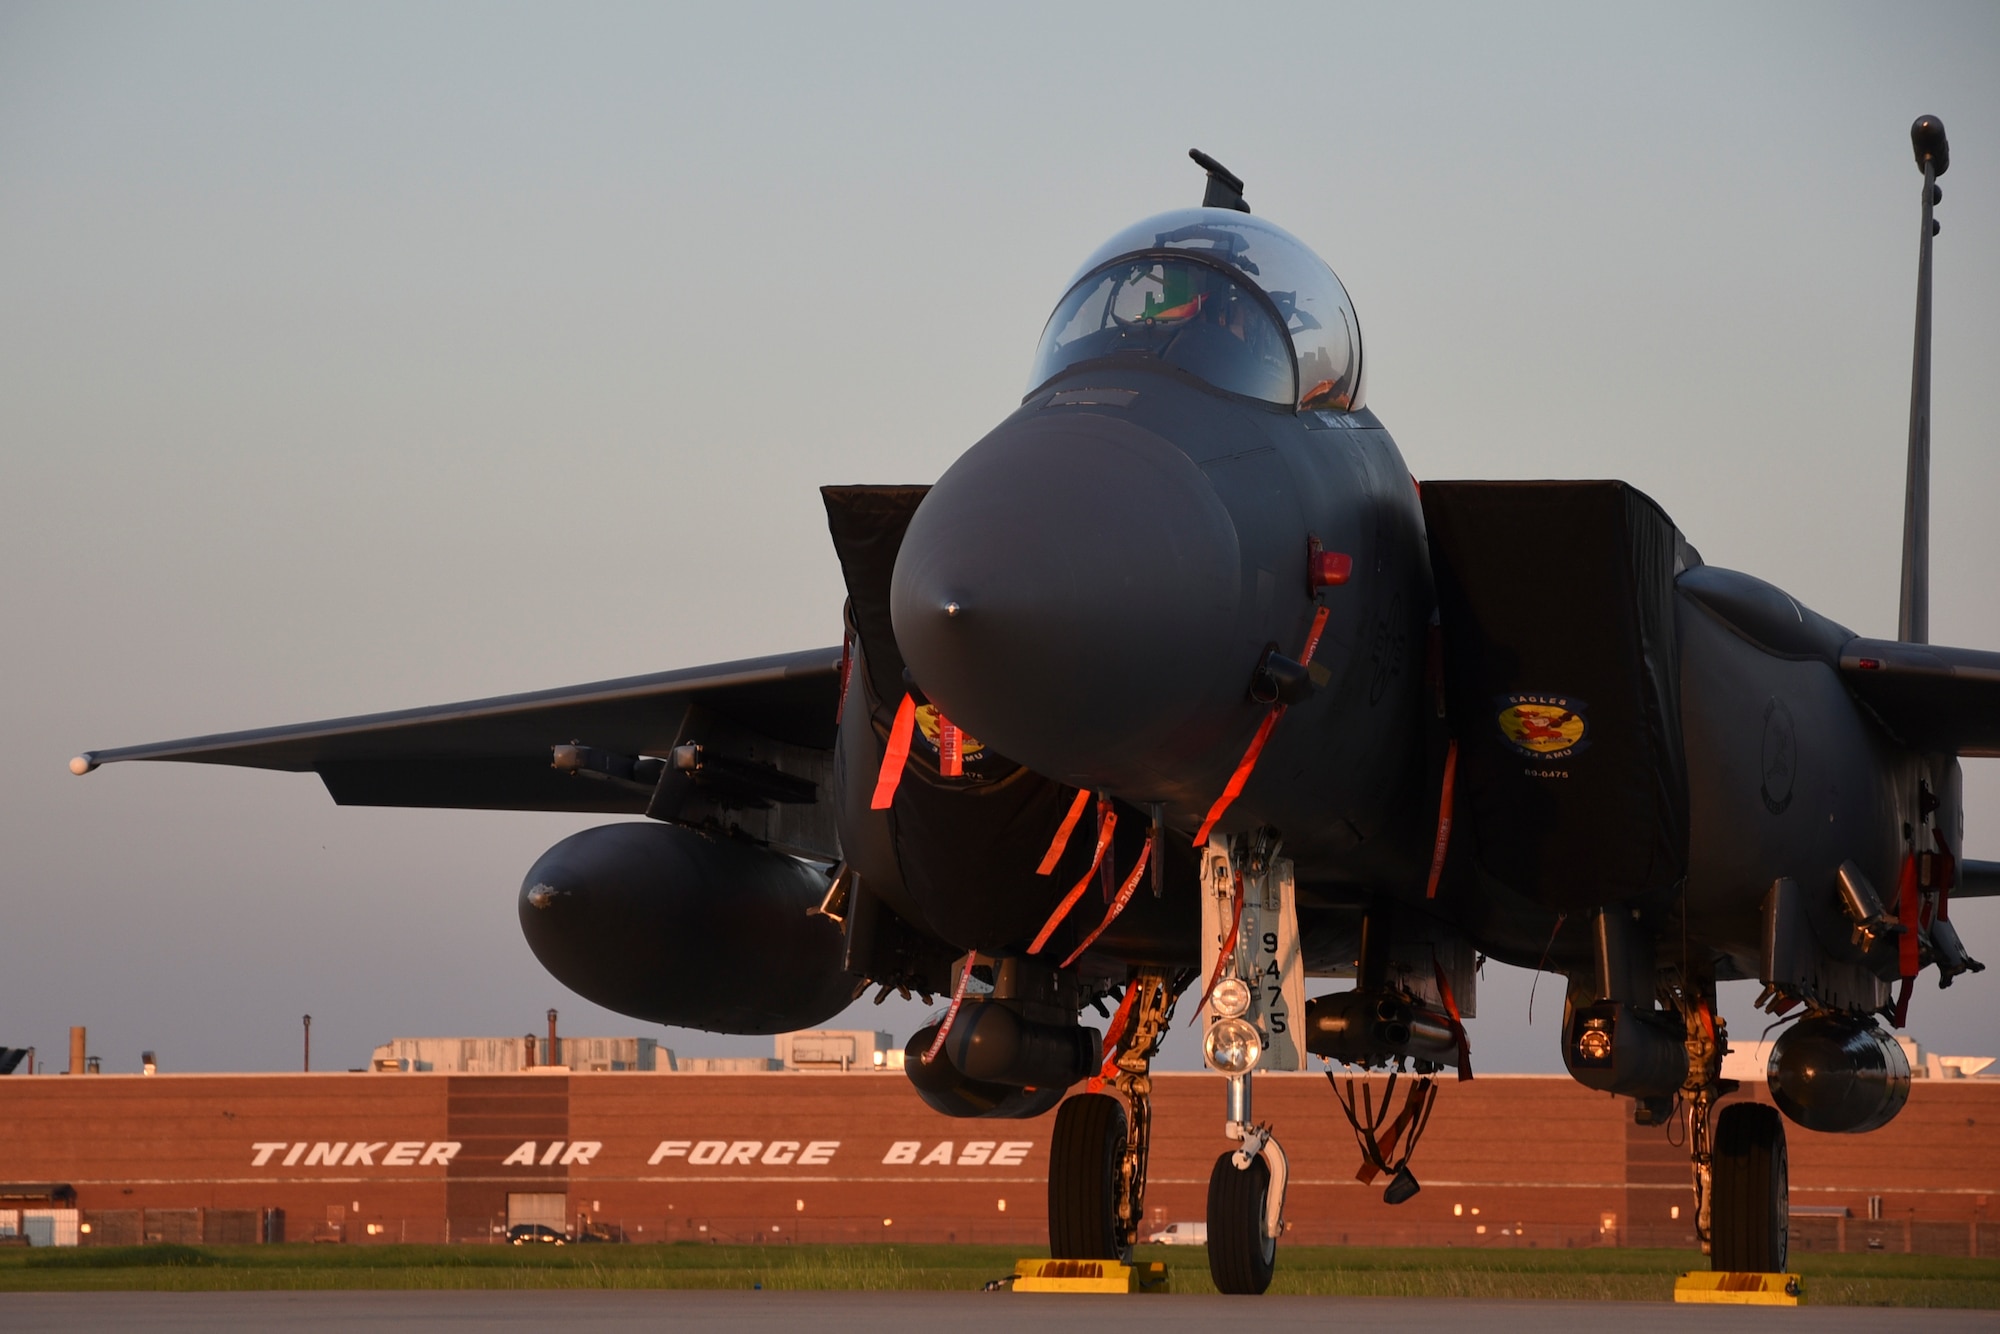 An F-15E Strike Eagle basks in the late evening light after escaping Hurricane Dorian's path and relocating to Tinker Air Force Base, Oklahoma, Sept. 4, 2019. The F-15E is assigned to the 4th Fighter Wing, Seymour-Johnson AFB, North Carolina, as part of Air Combat Command. Team Tinker executed an existing agreement with Seymour-Johnson AFB, North Carolina and Warner-Robins AFB, Georgia to host fighters, tankers and reconnaissance aircraft far away from the devastating hurricane impacting the East Coast of the United States. (U.S. Air Force photo/Greg L. Davis)